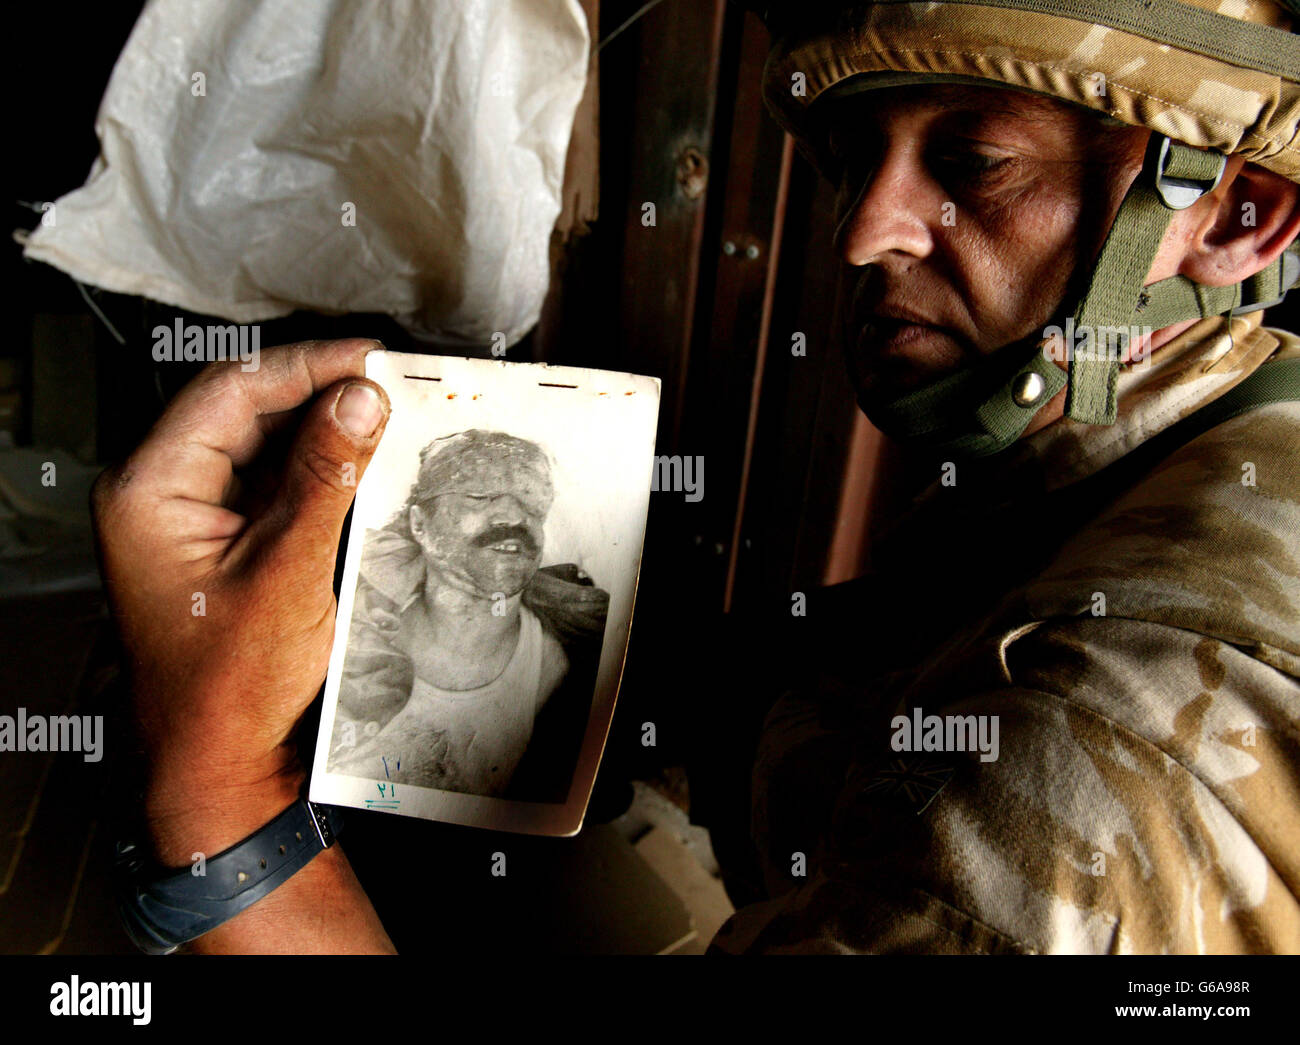 NOTE GRAPHIC CONTENT. A soldier holds up a photo showing the dead body of what is thought to be an Iraqi, discovered along with human remains and coffins at an abandoned Iraqi base near Basra. Hundreds of human remains were discovered in a makeshift morgue. Dan Chung / Guardian / MOD Pool. *... by British soldiers in southern Iraq. The skulls, bundles of bone in strips of military uniform, were dumped in plastic bags and unsealed hardboard coffins in an abandoned Iraqi military base on the outskirts of Al Zubayr. It was impossible to say how long the remains had lain there but the grim Stock Photo